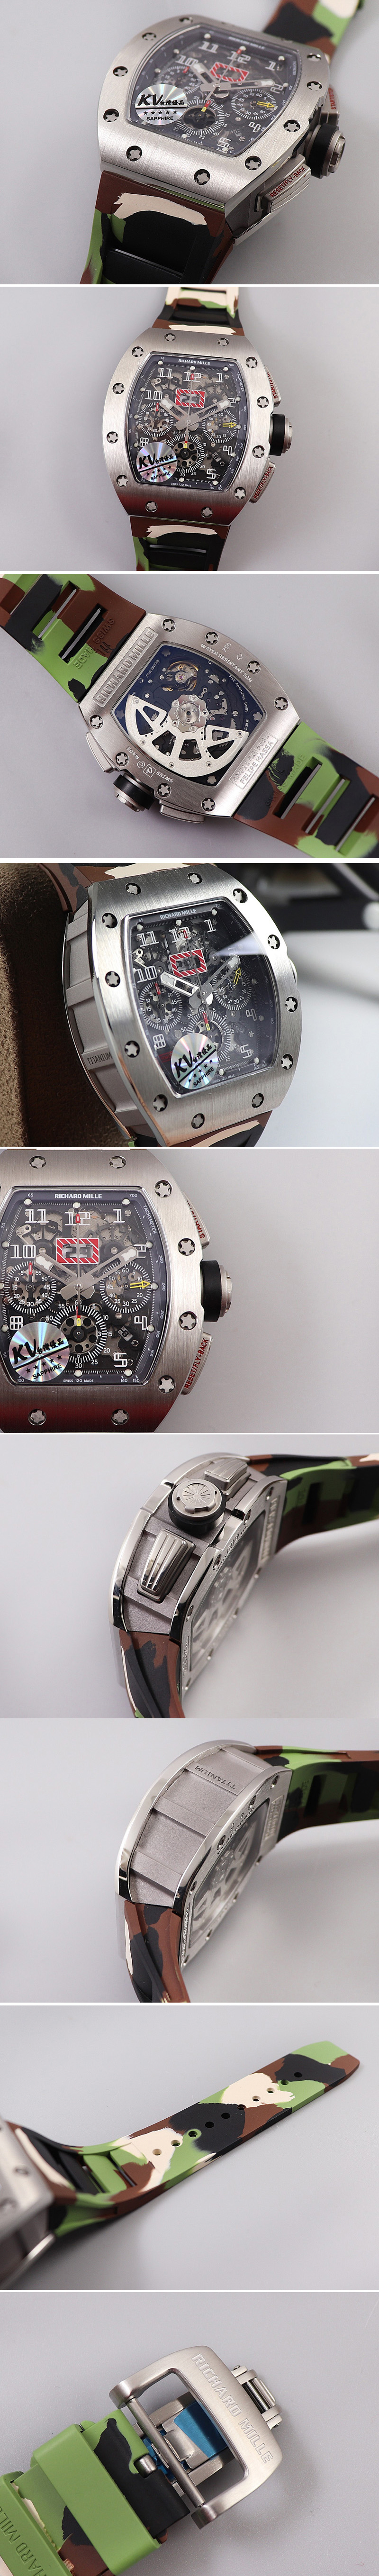 Replica Richard Mille RM011 SS Chrono KVF 1:1 Best Edition Crystal Dial Black on Green Camo Rubber Strap A7750